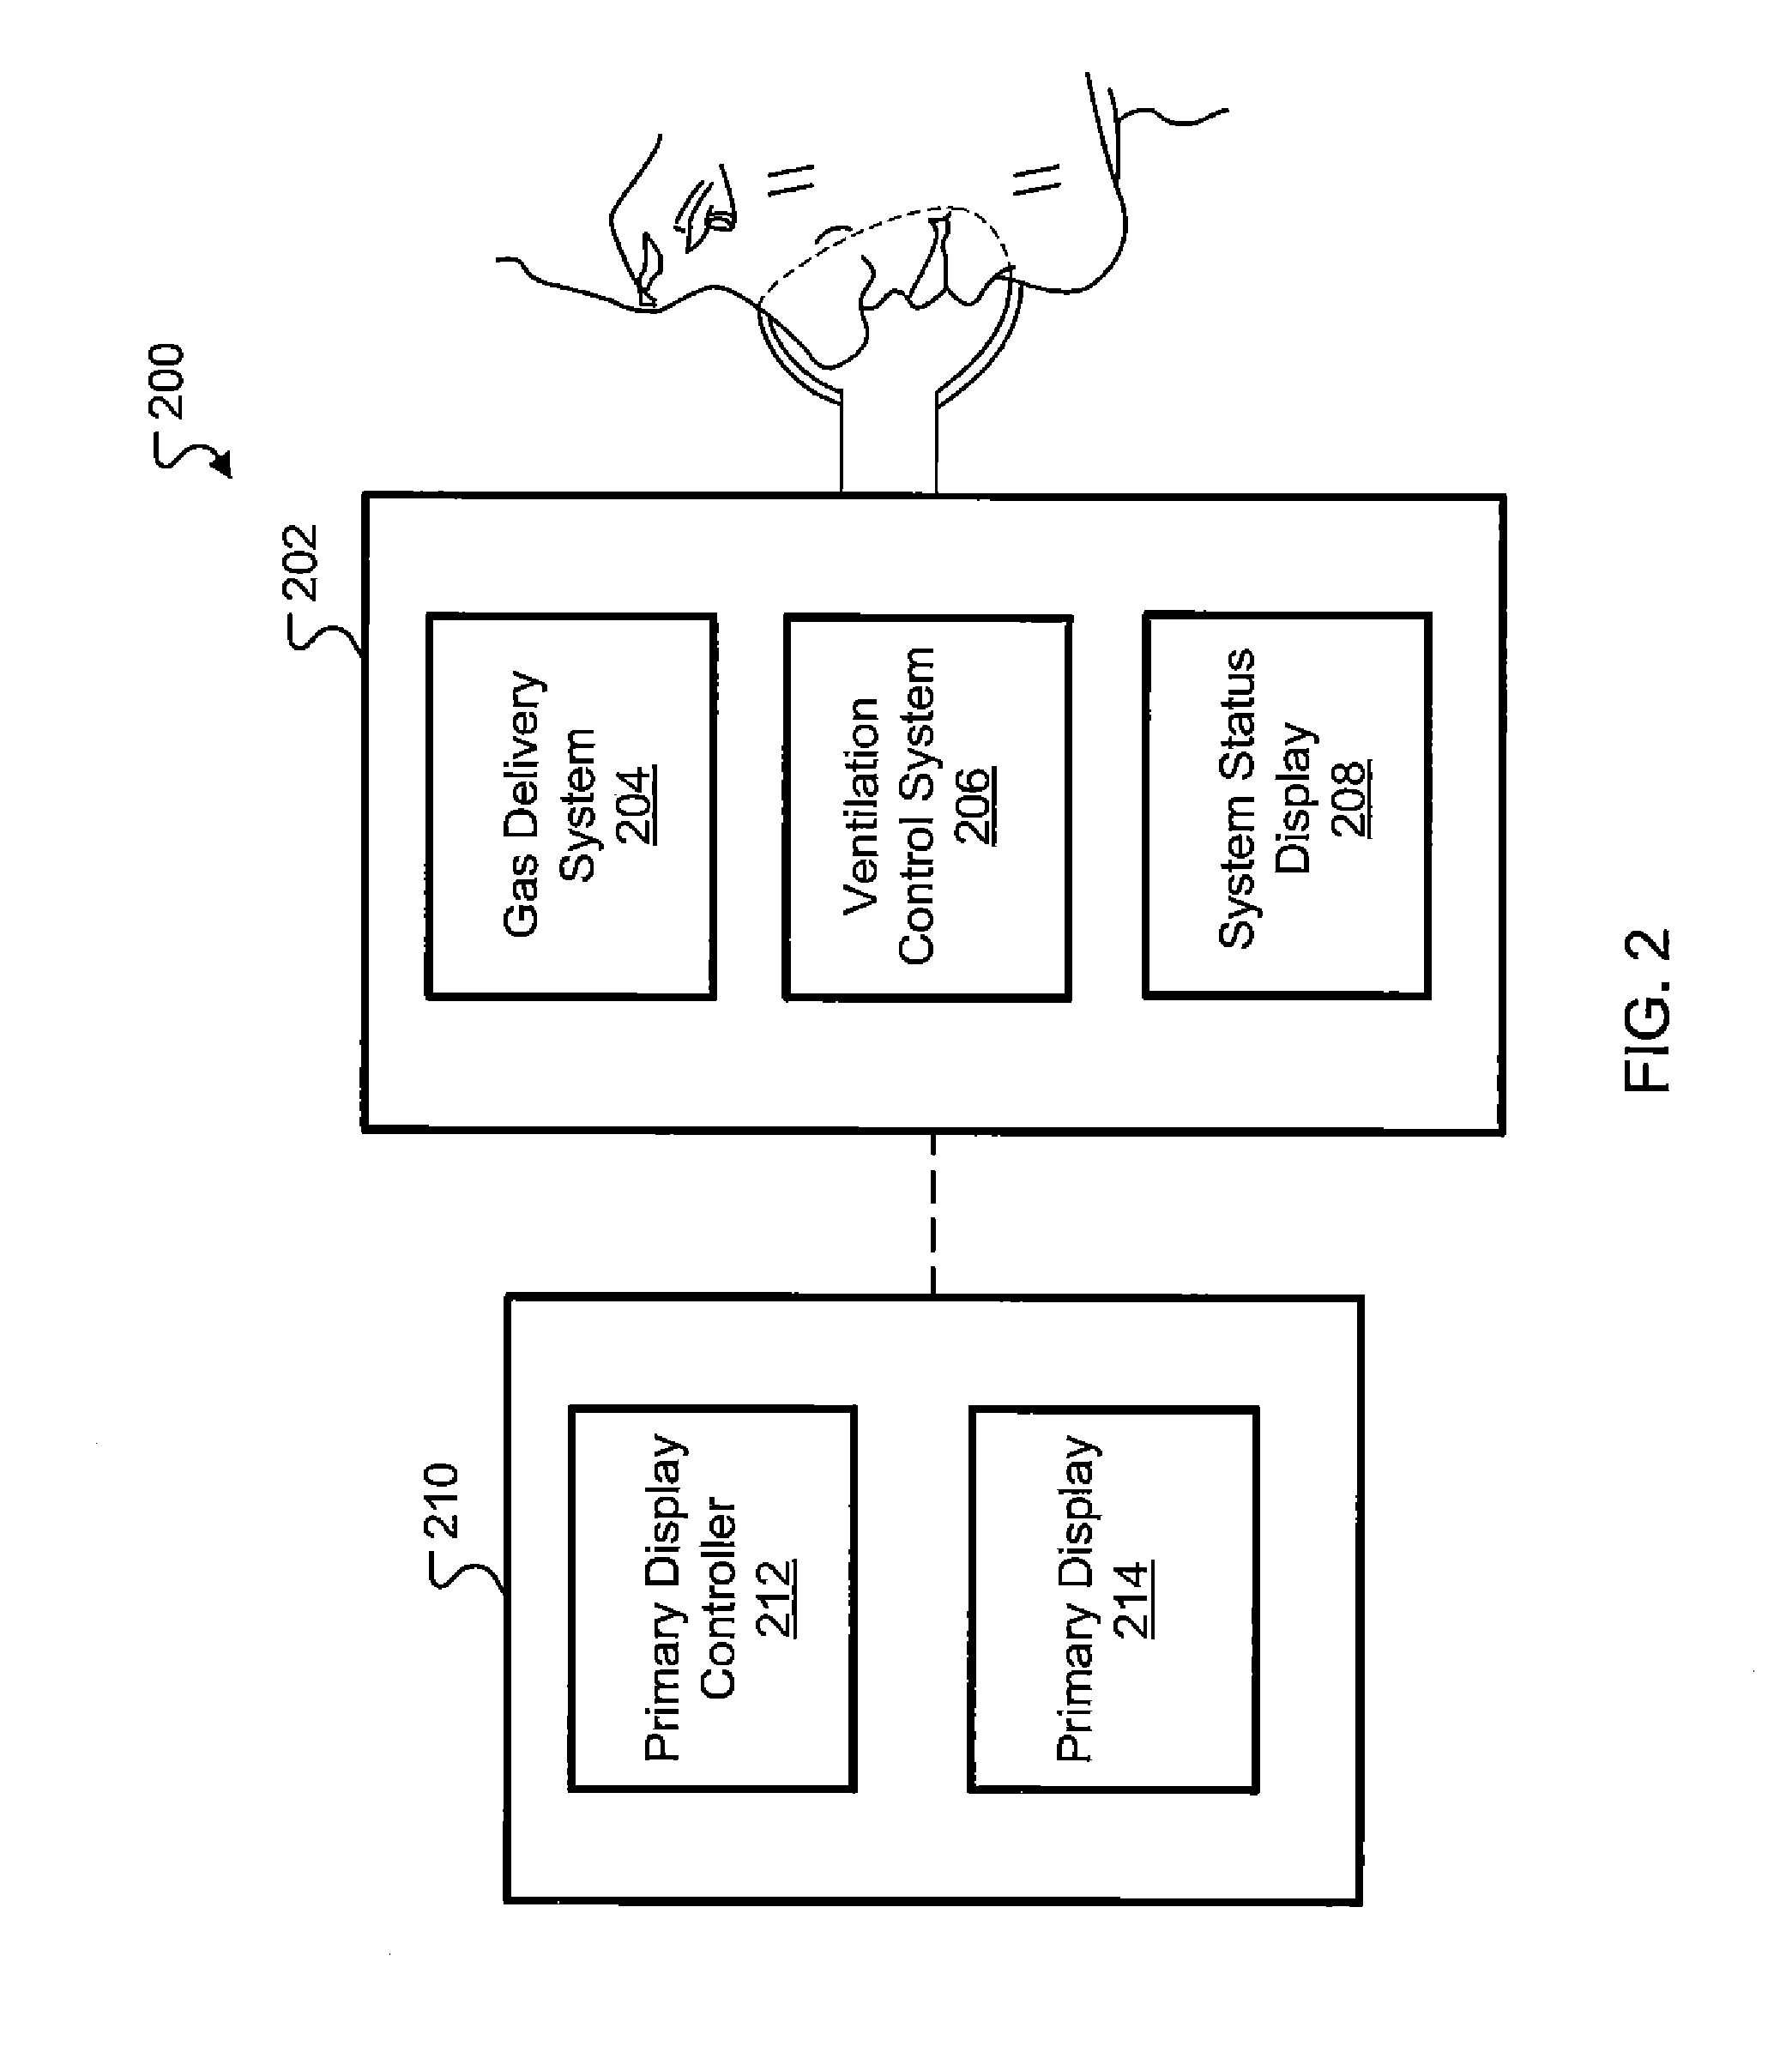 Ventilation System With System Status Display For Maintenance And Service Information